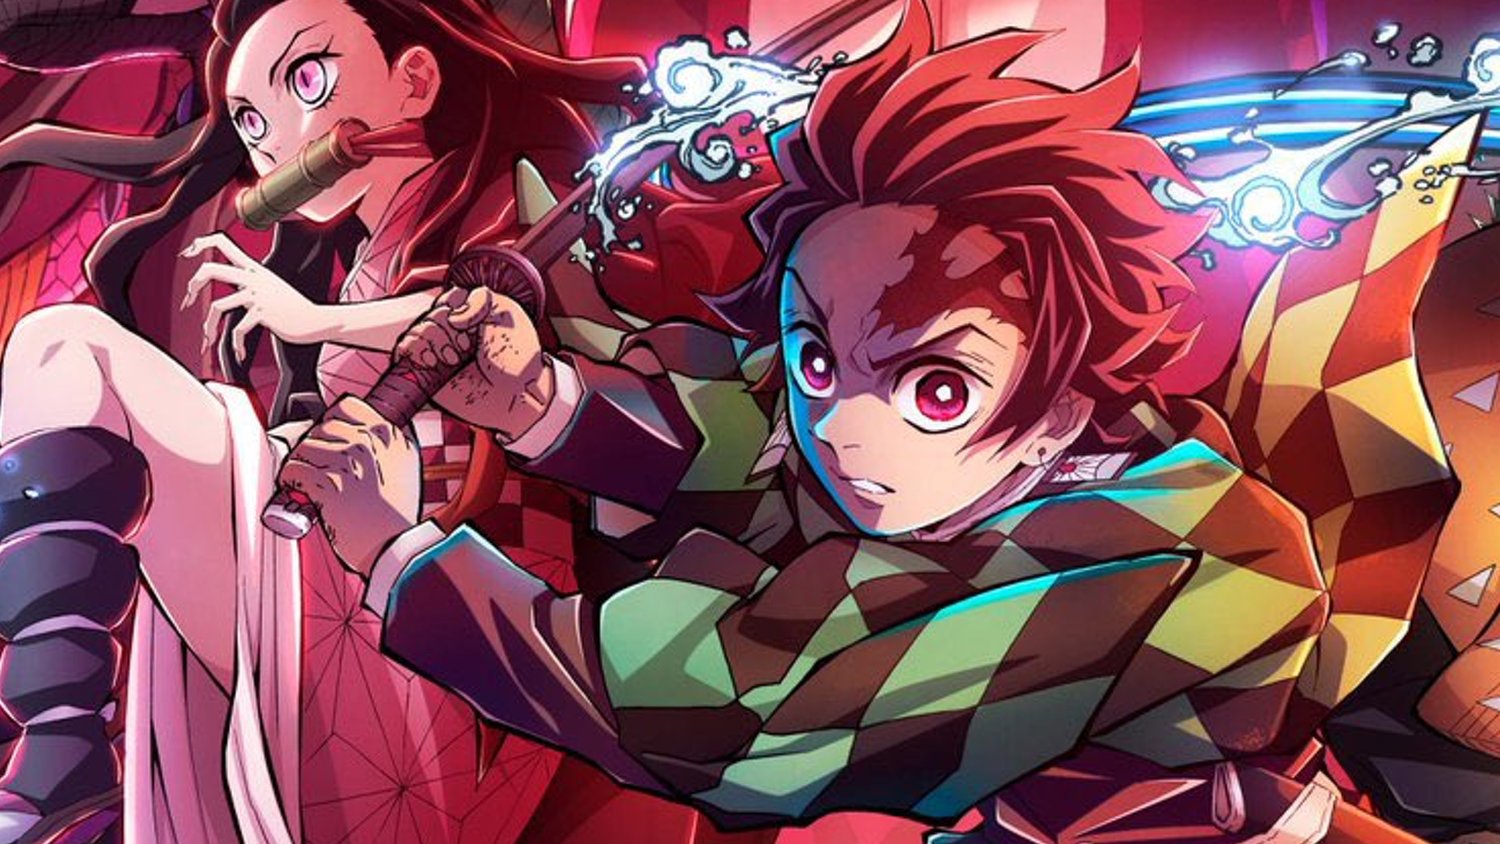 THE DEVIL IS A PART-TIMER Season 3 Gets a Trailer and Poster — GeekTyrant